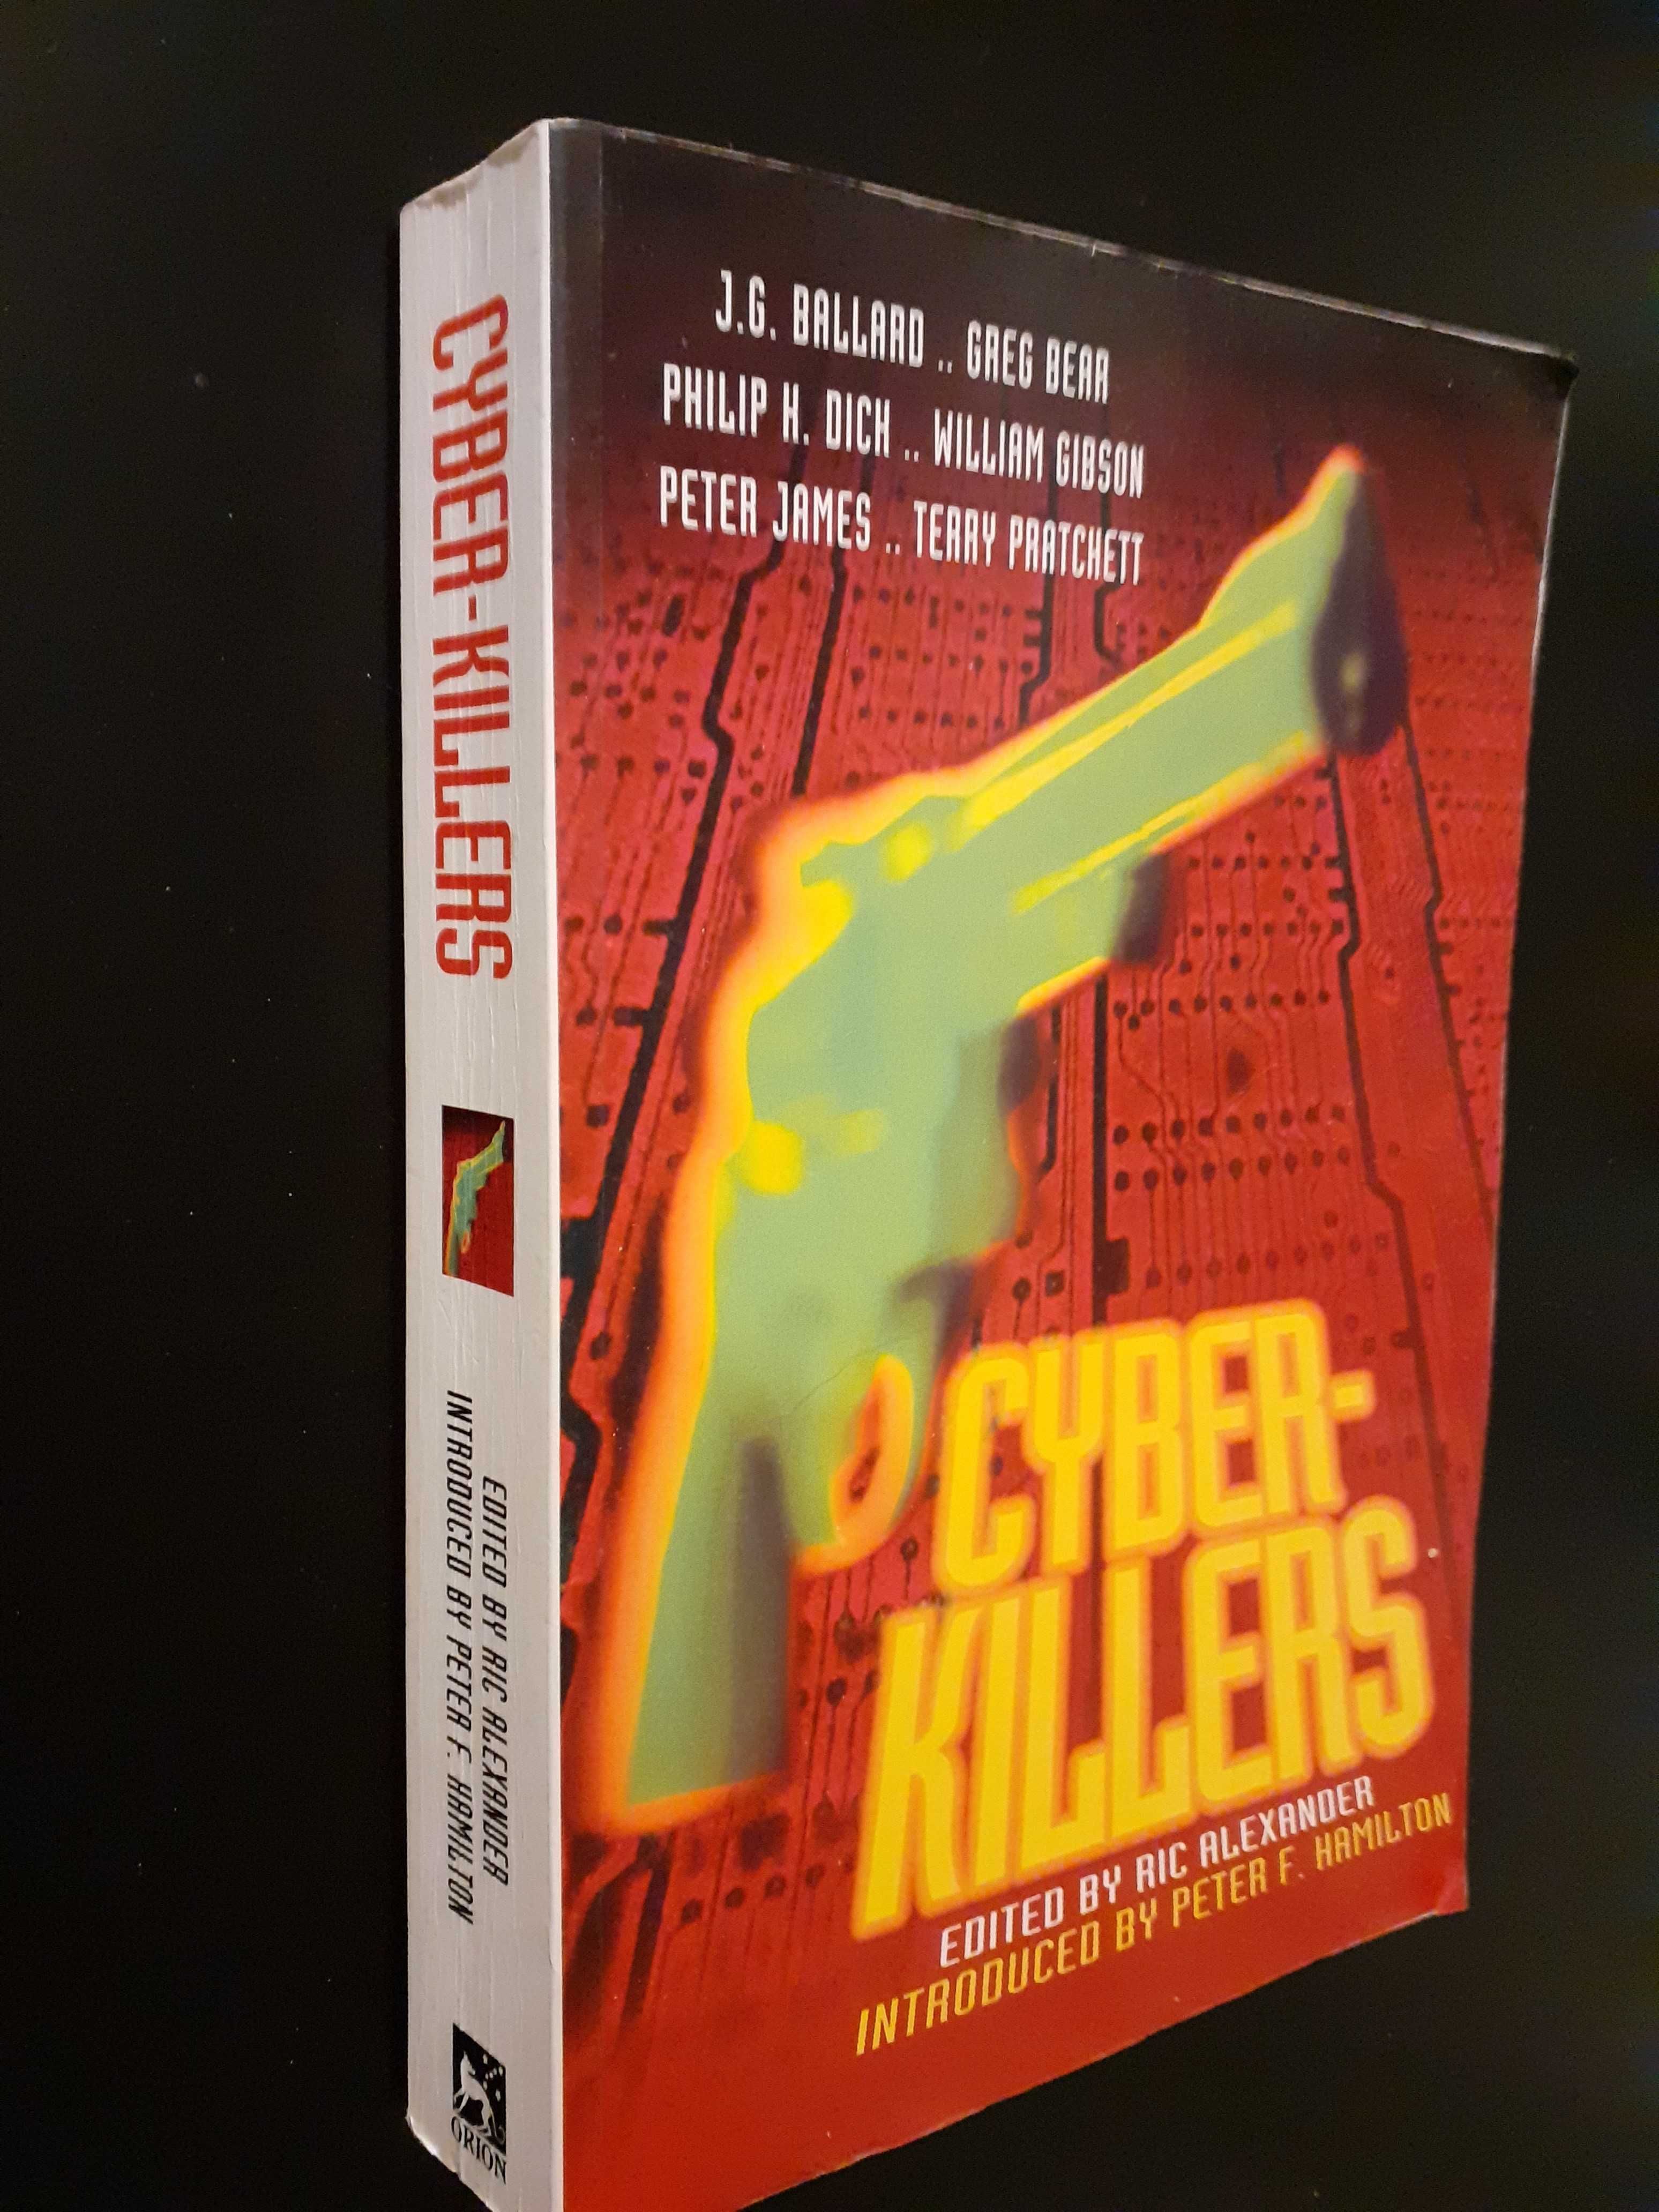 Ric Alexander (editor), Cyber-Killers - antologie science-fiction